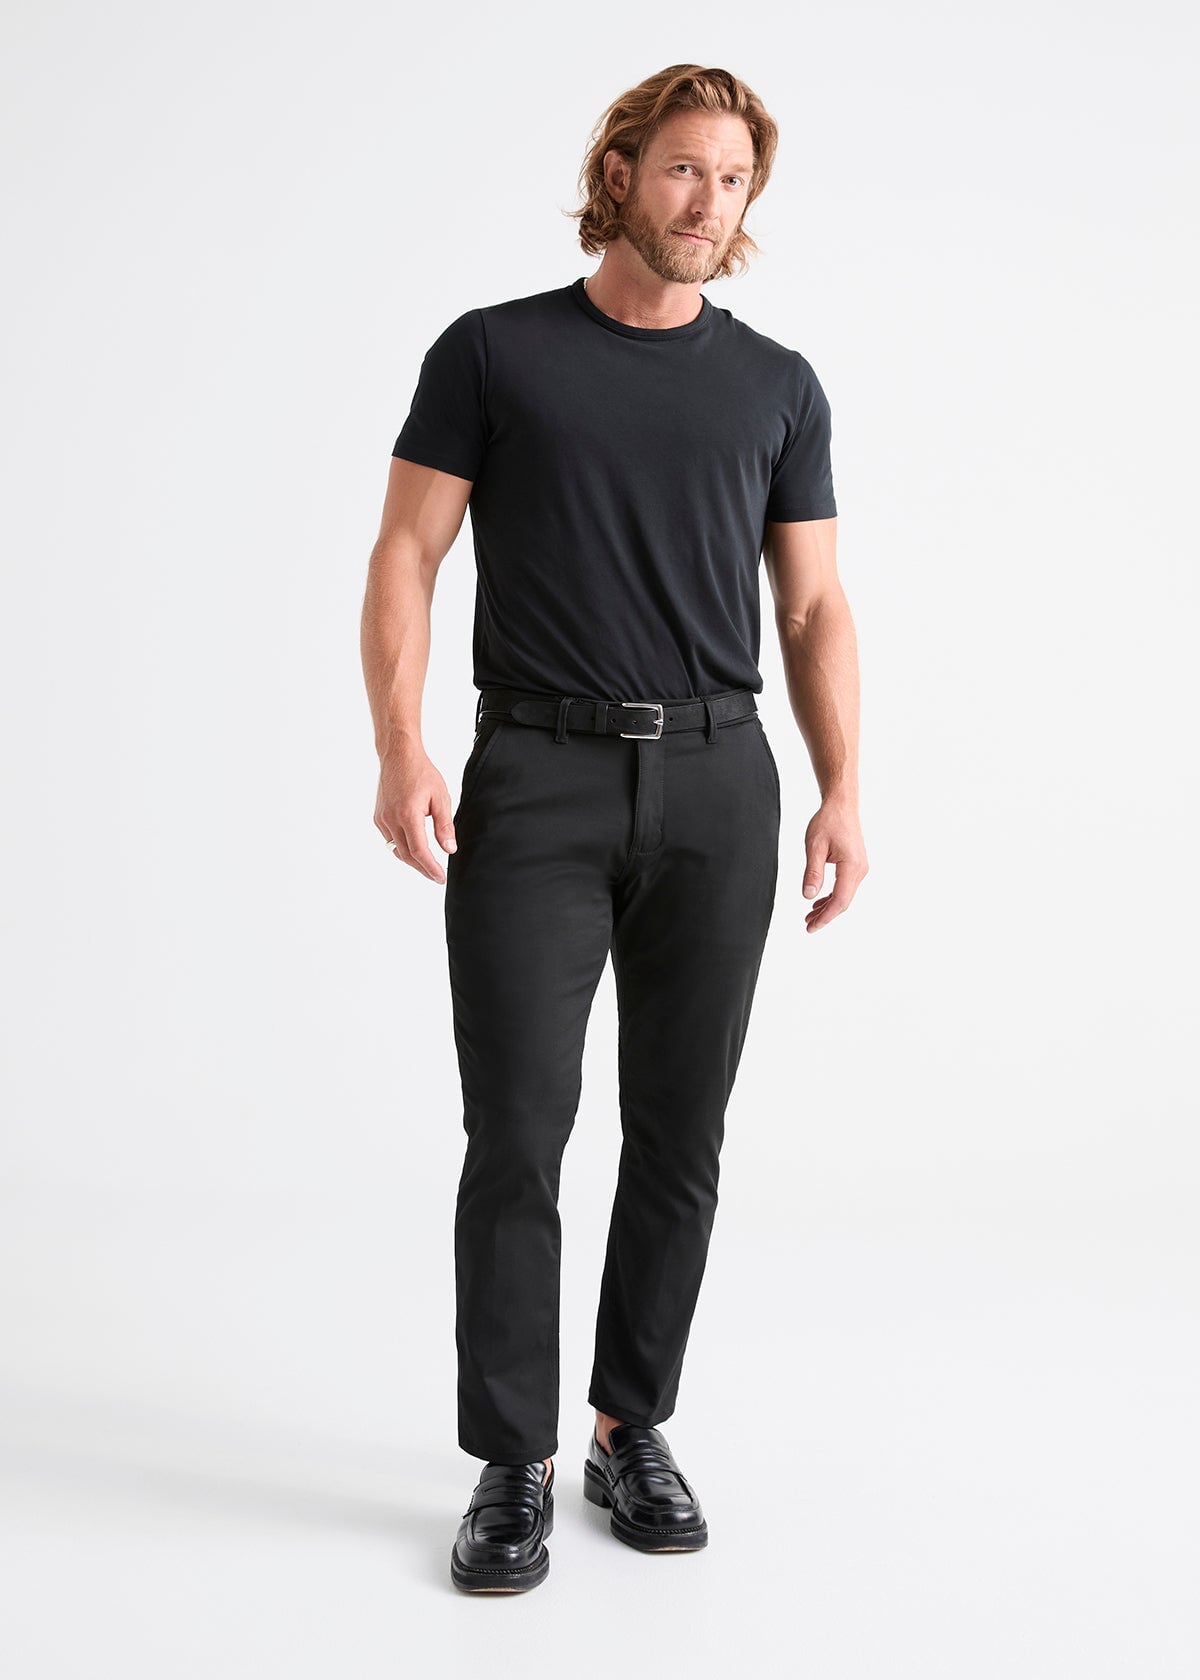 mens black relaxed stretch fit dress pant full body